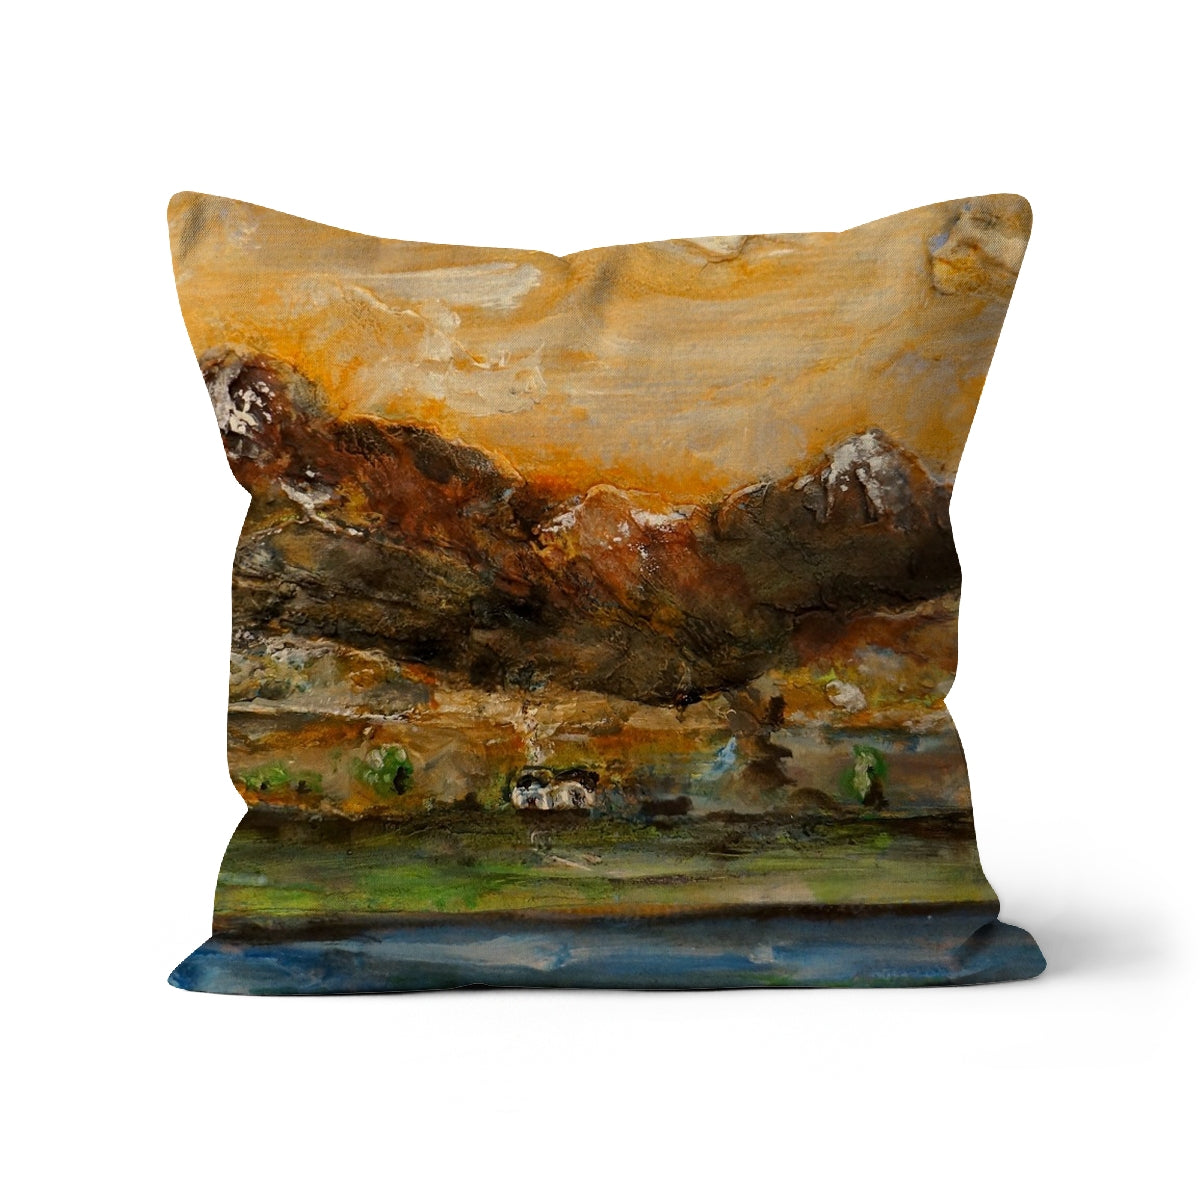 A Glencoe Cottage Art Gifts Cushion-Cushions-Glencoe Art Gallery-Linen-18"x18"-Paintings, Prints, Homeware, Art Gifts From Scotland By Scottish Artist Kevin Hunter